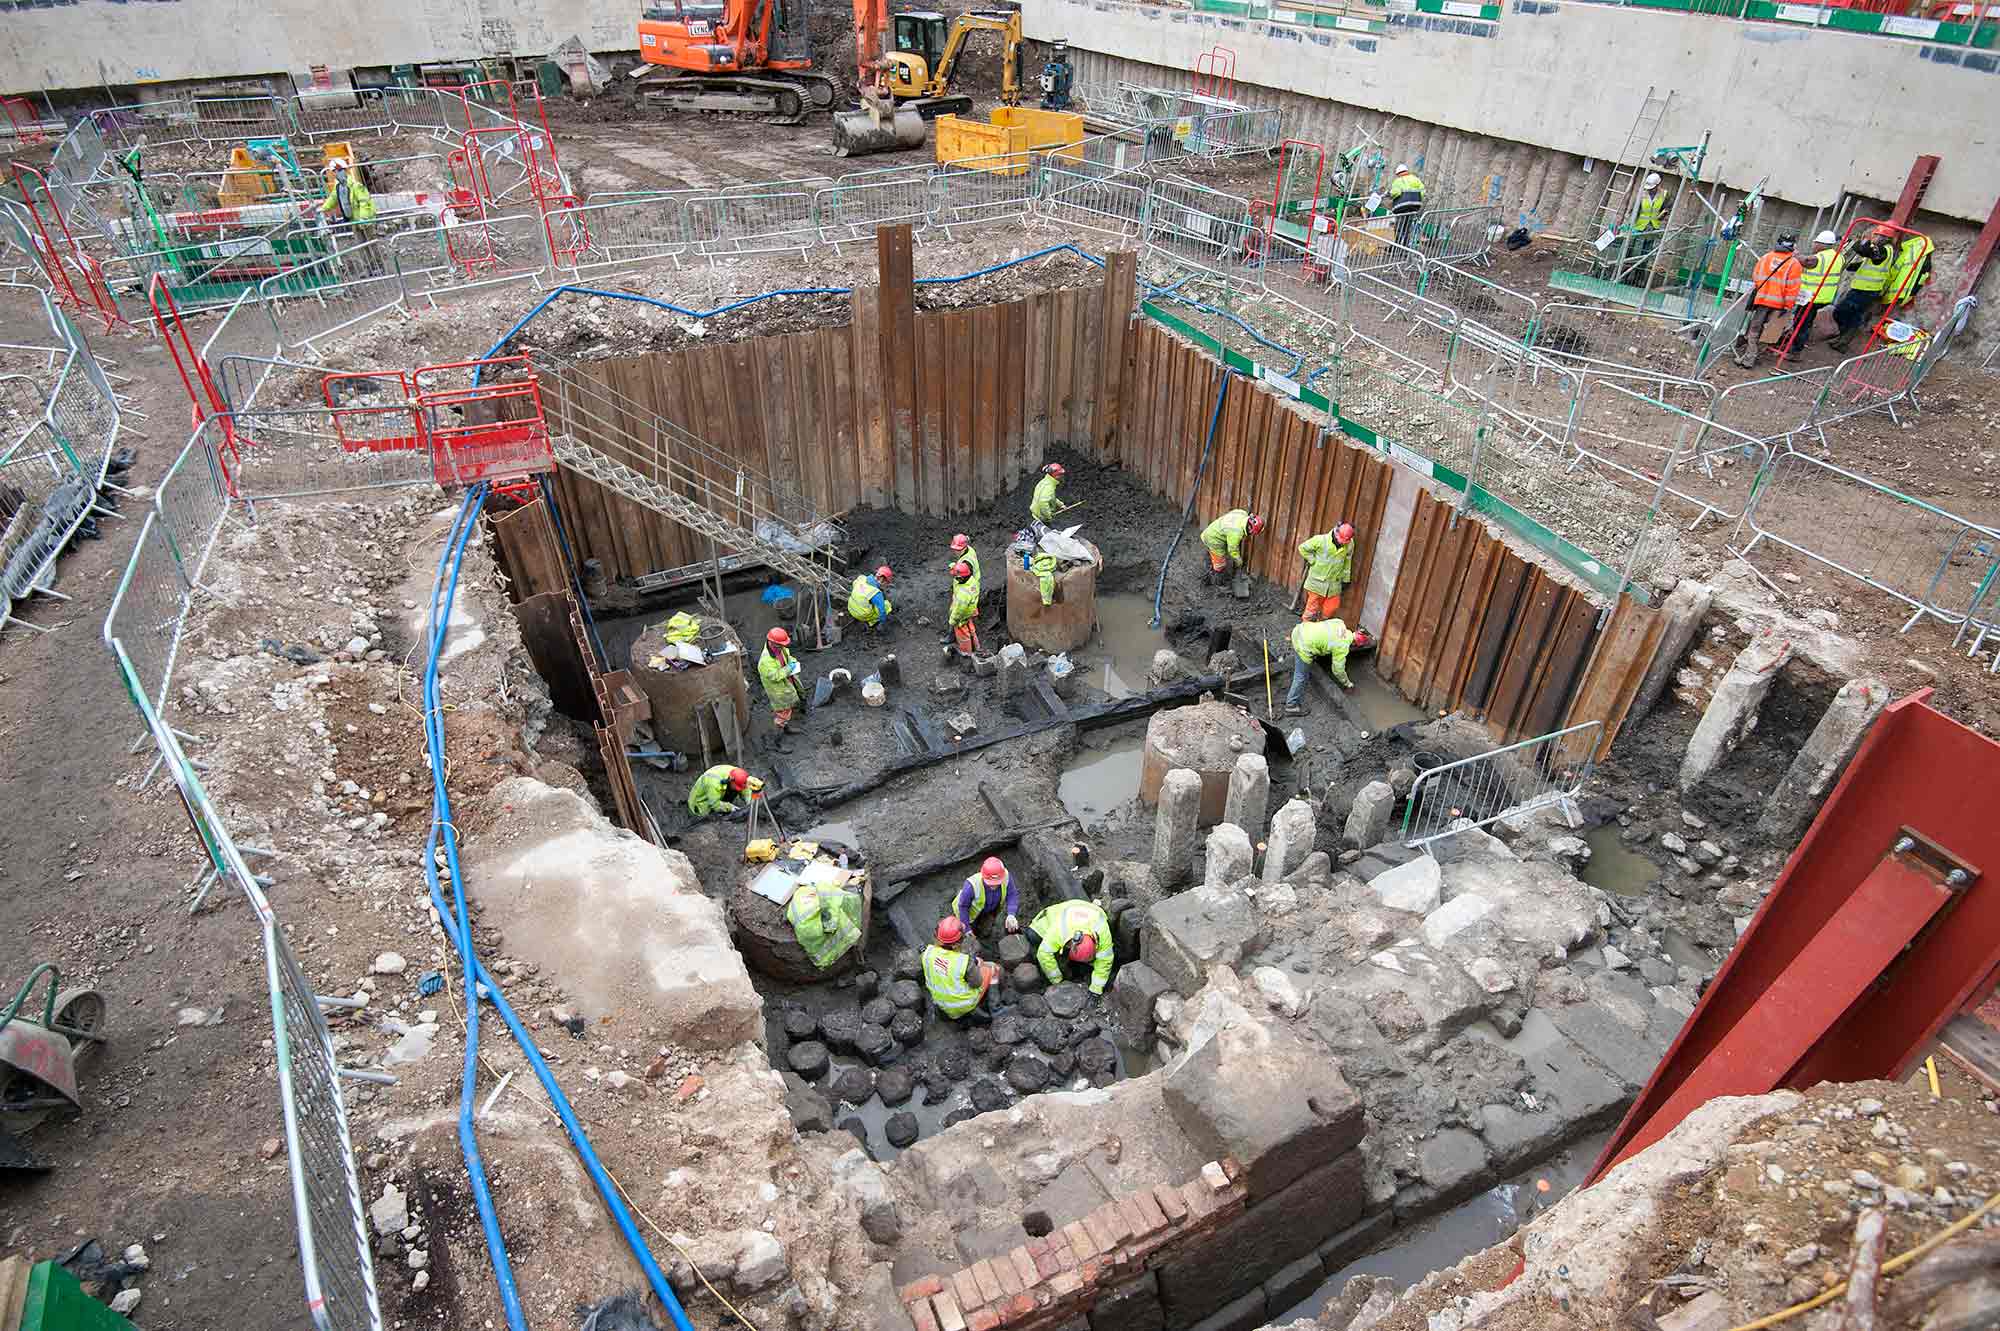 People working on an excavation site